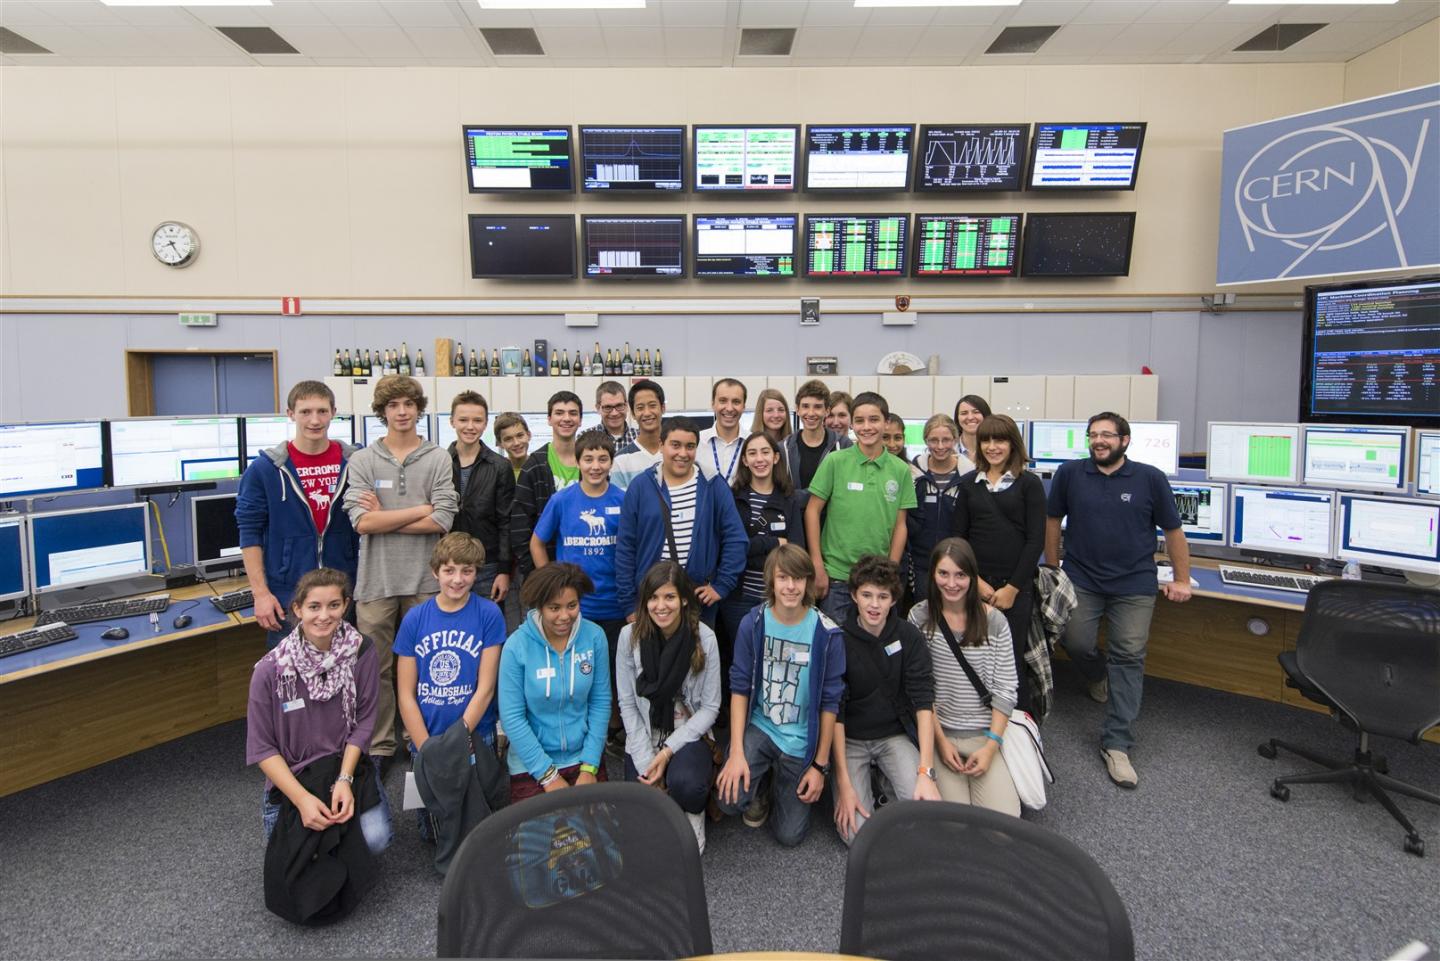 CERN welcomes students for European Researchers Night